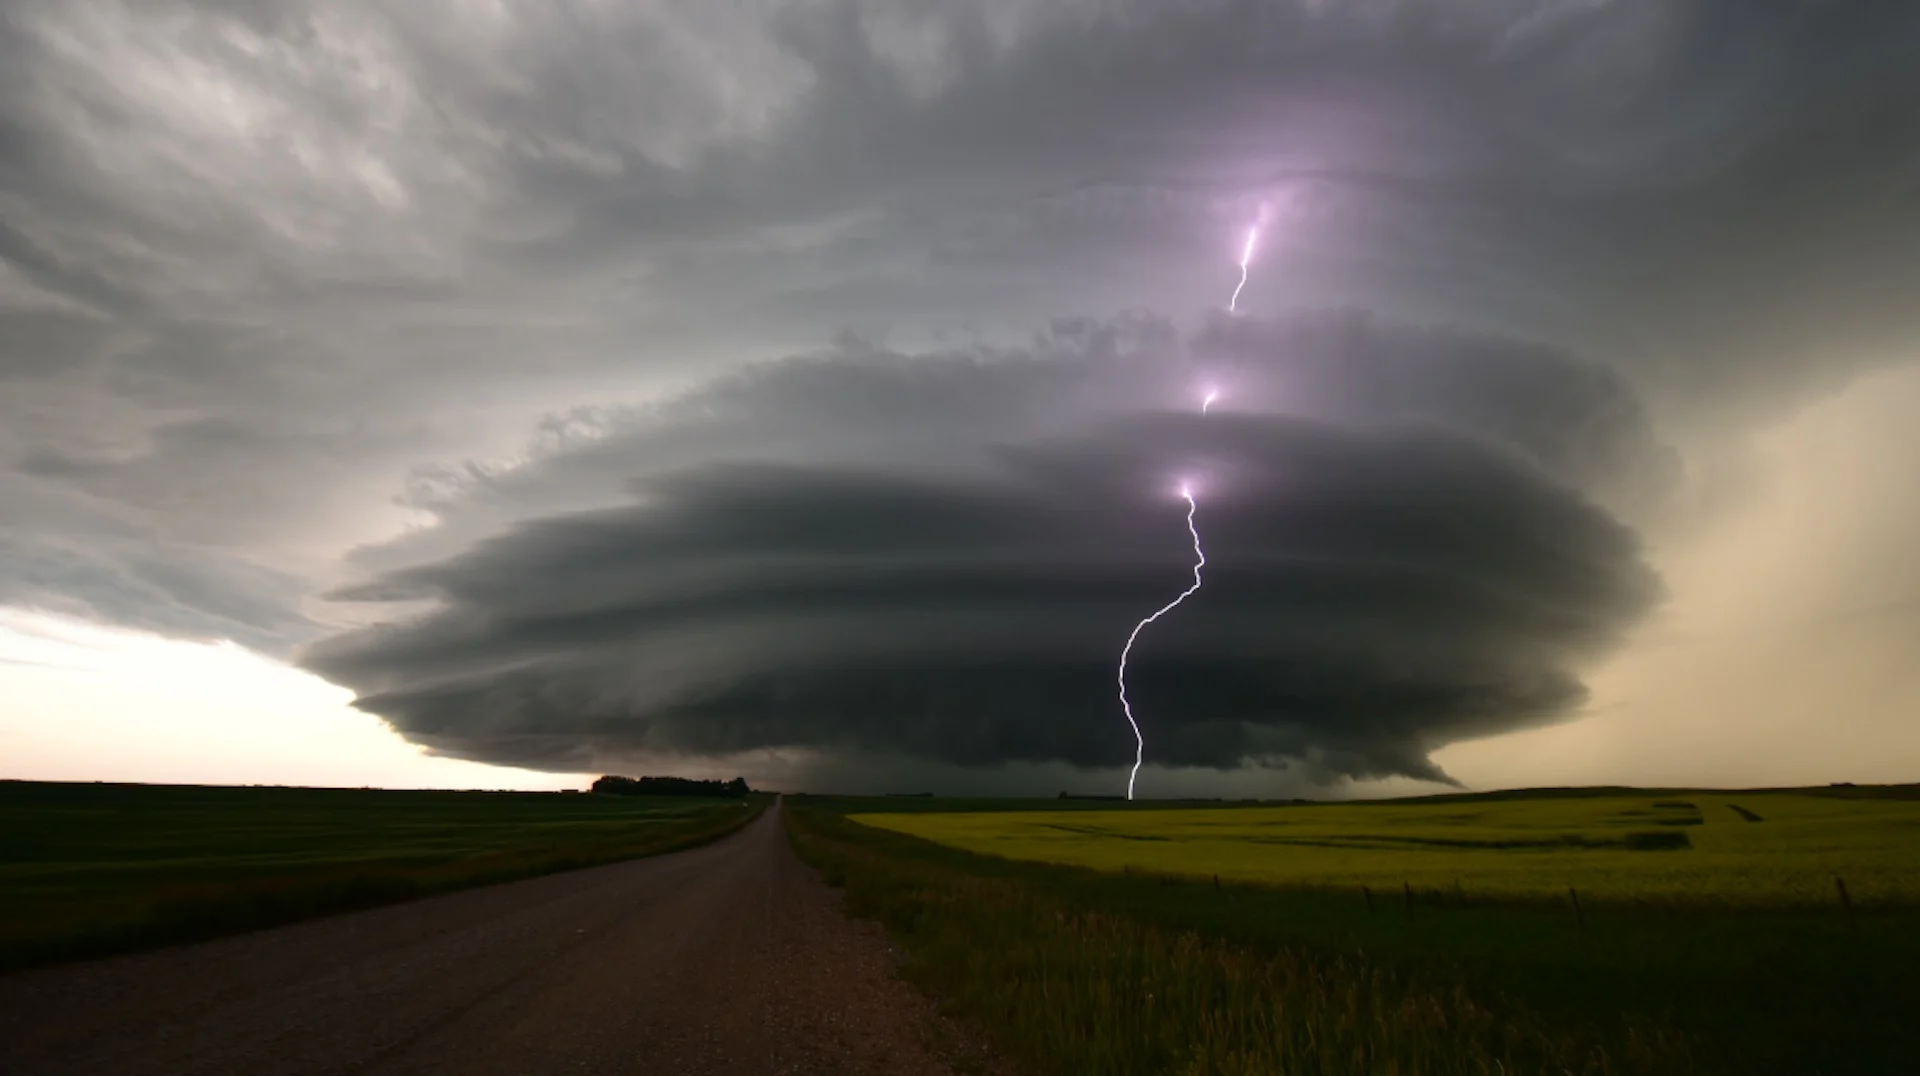 Severe storm risk persists on the Prairies, with large hail possible